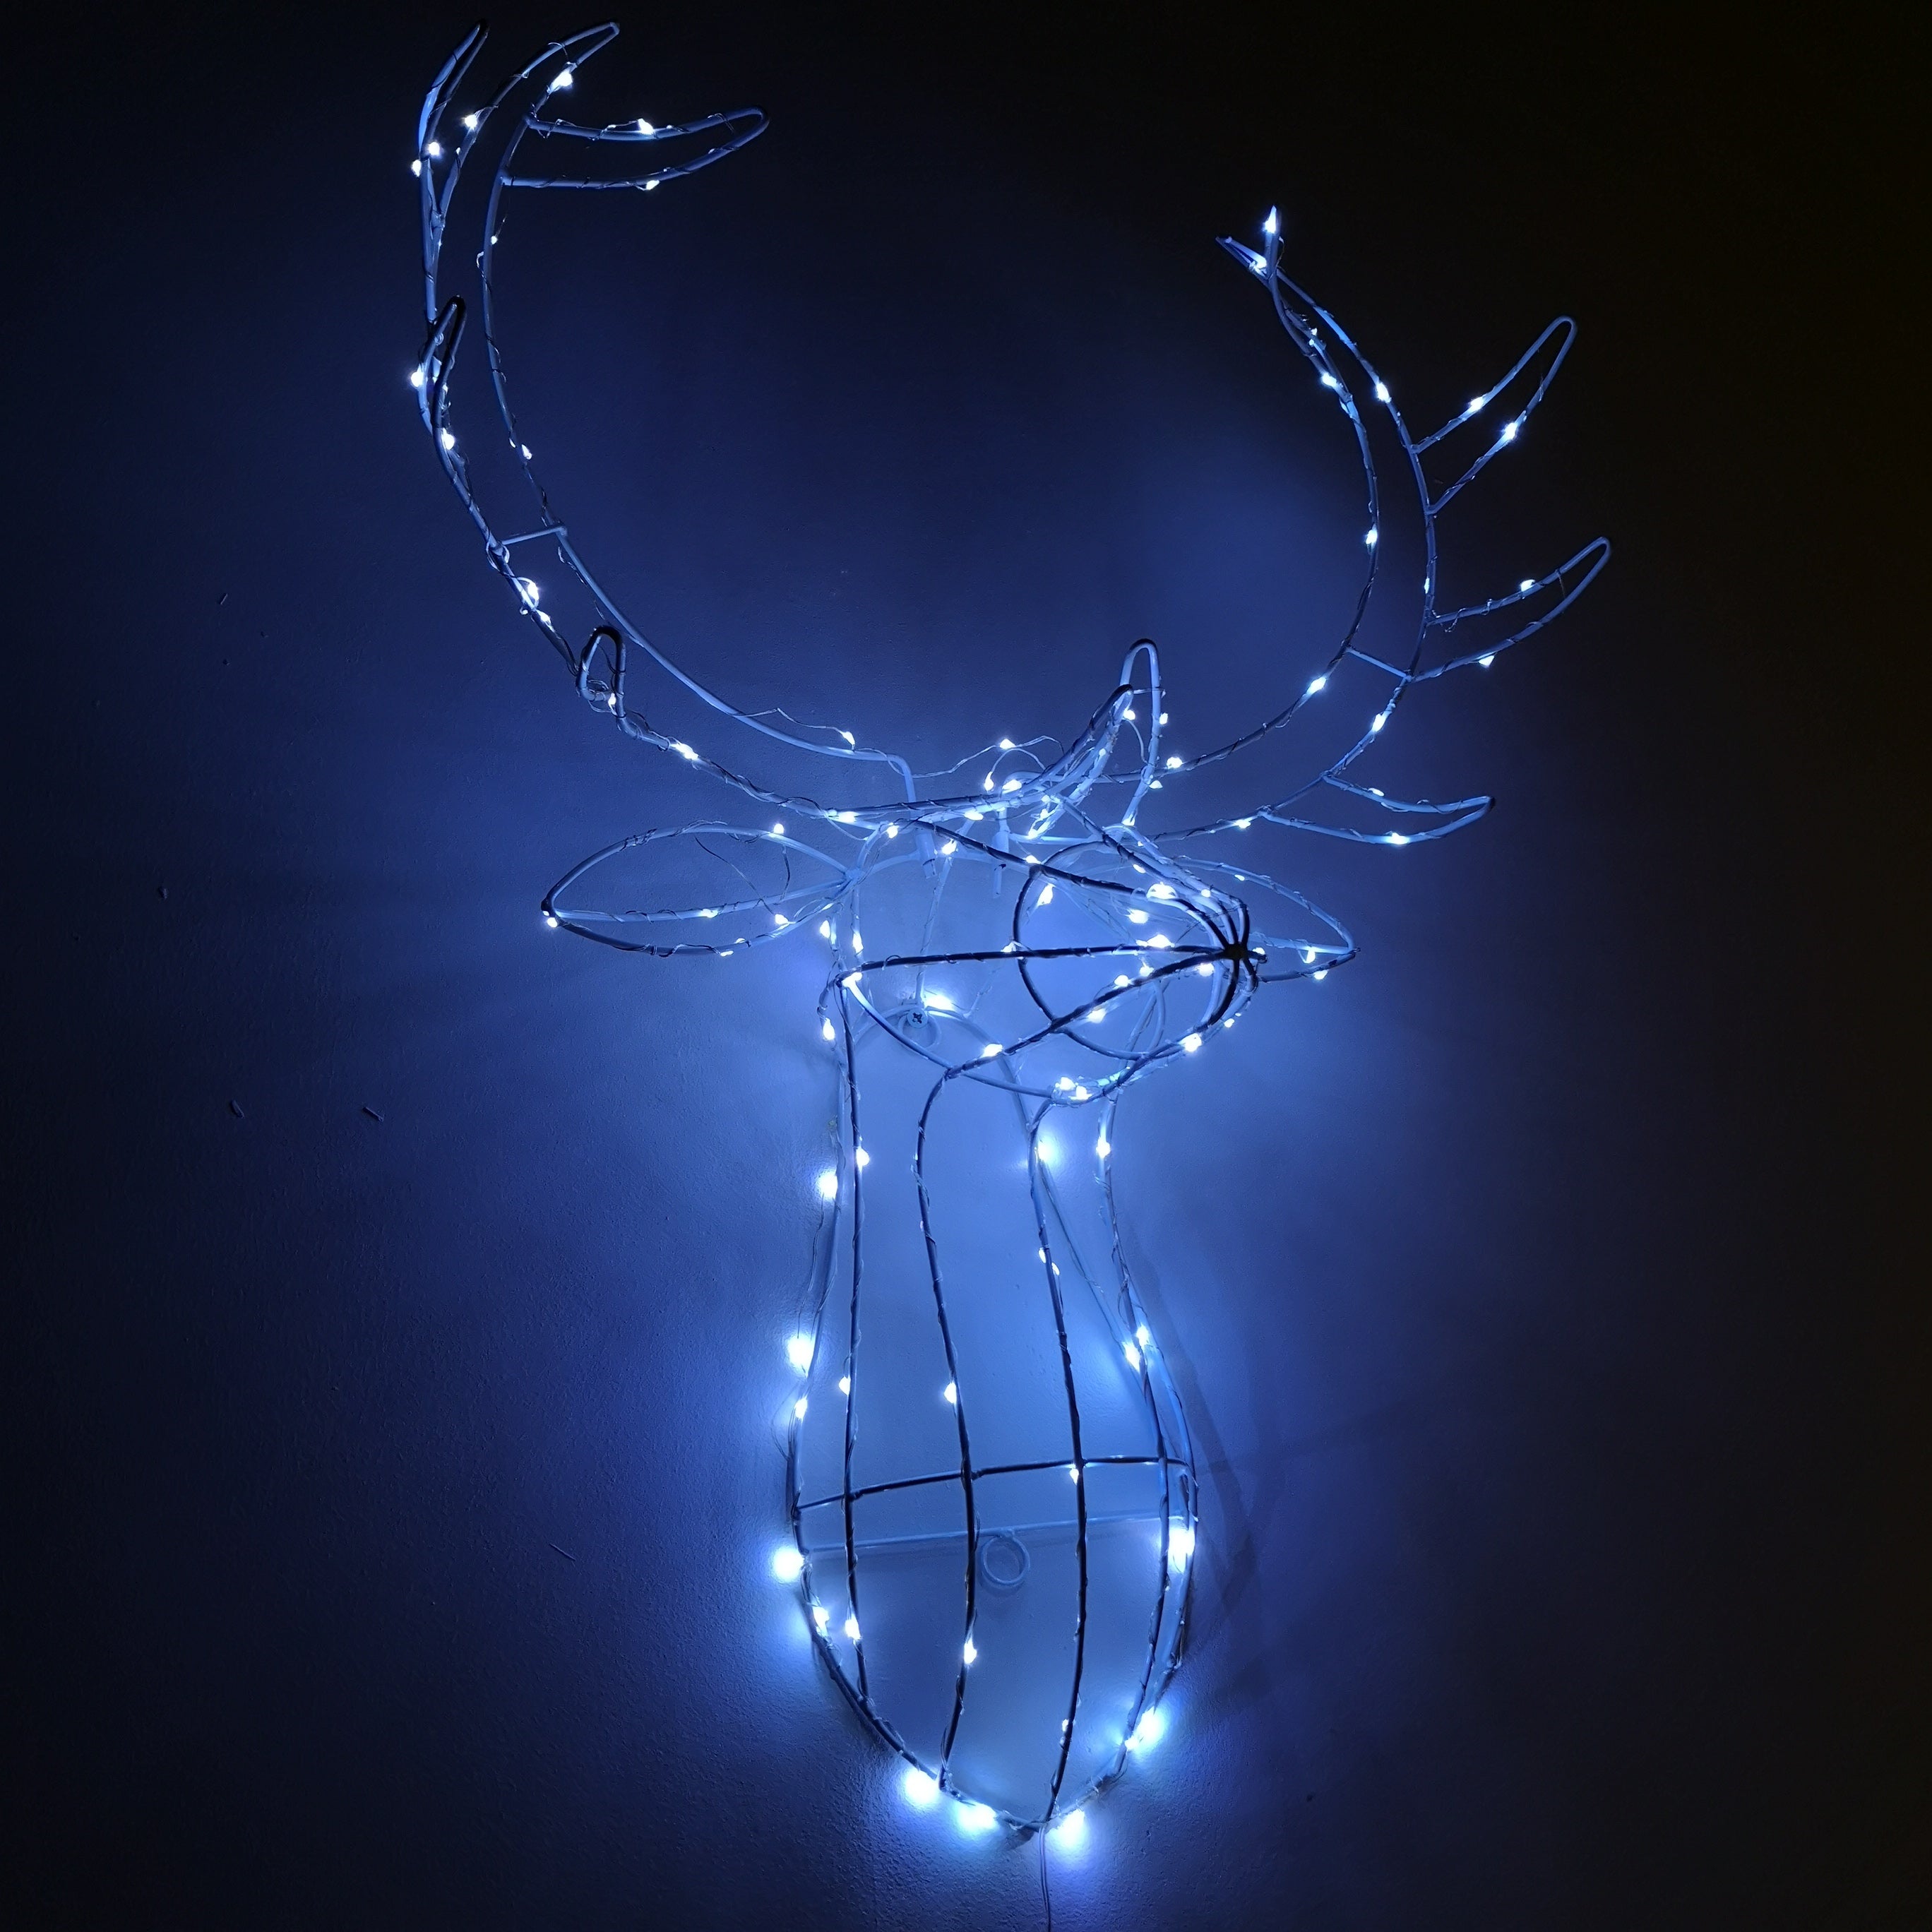 70cm Outdoor Light Up Reindeer Head Christmas Decoration with Twinkling Ice White LEDs